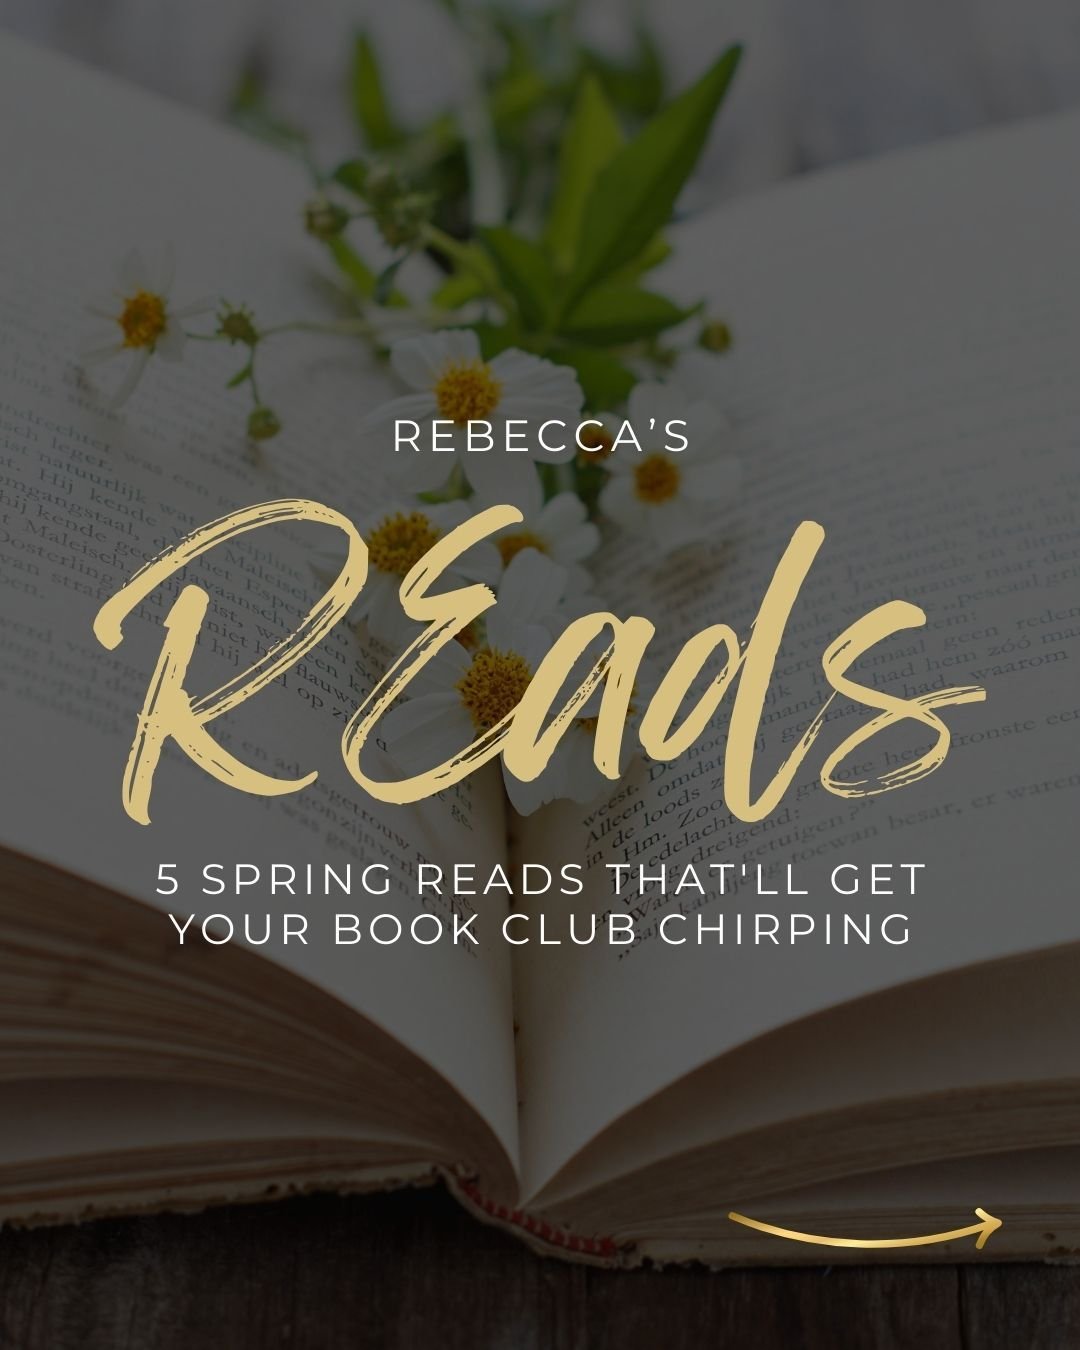 Just a friendly reminder, no book snobs allowed 🙅&zwj;♀️

Our spring recommendations go out to open-minded book lovers everywhere (you know who you are!).
.
.
.
#rebookspublishing #womeinpublishing #womenauthors